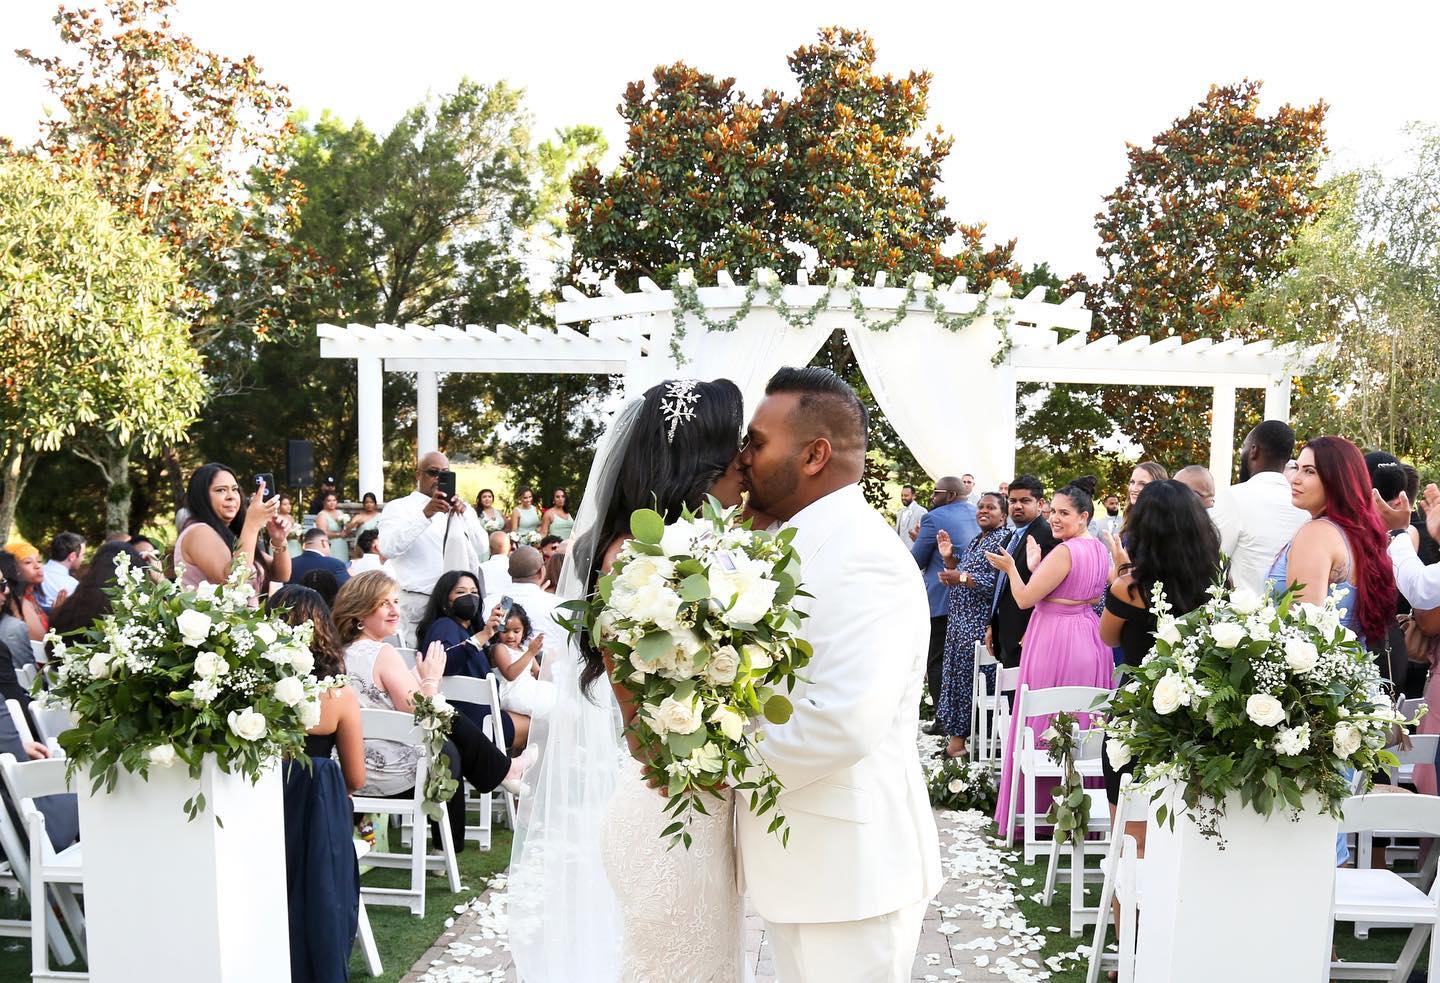 A Bride and Groom Kissing Each Other